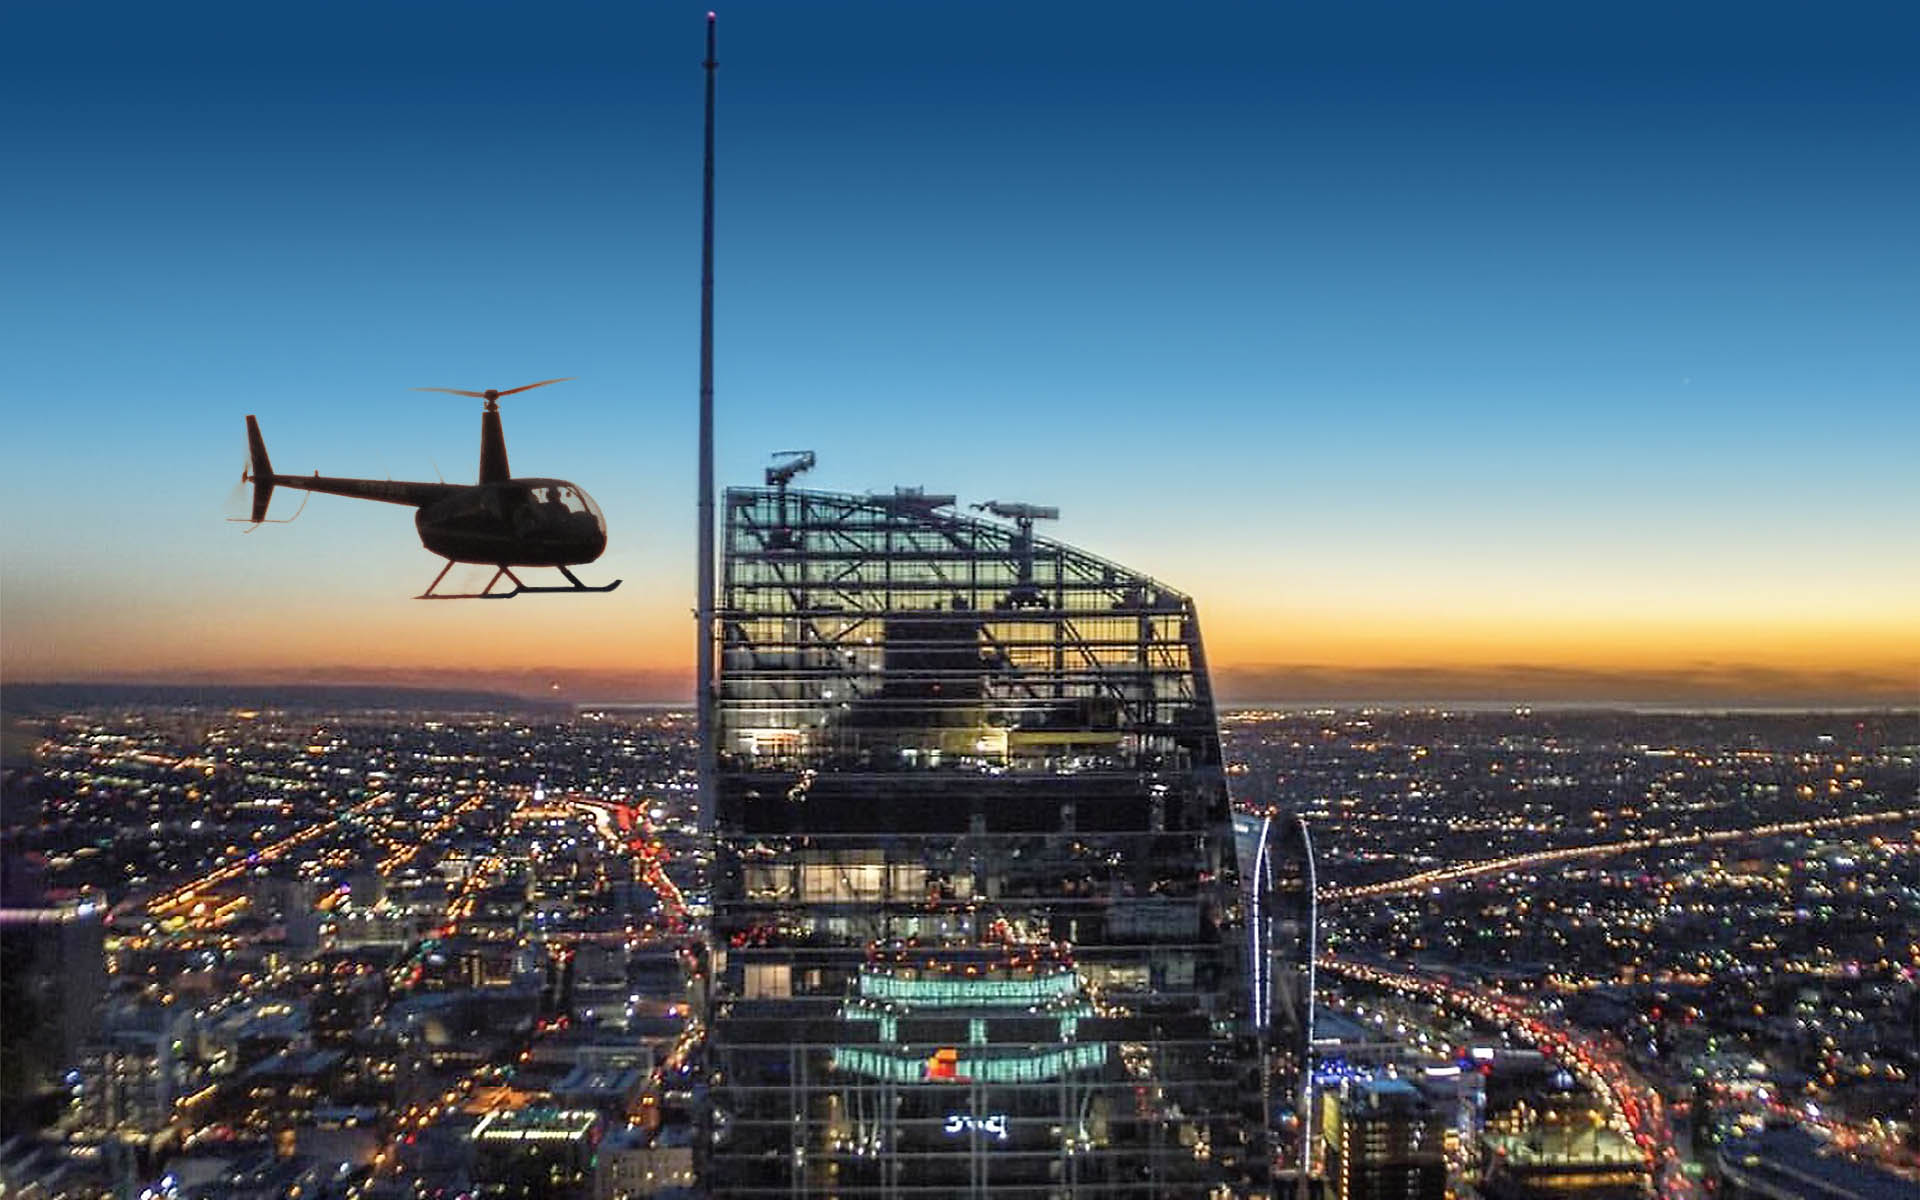 Helicopter flying past the Intercontinental Hotel in Los Angeles